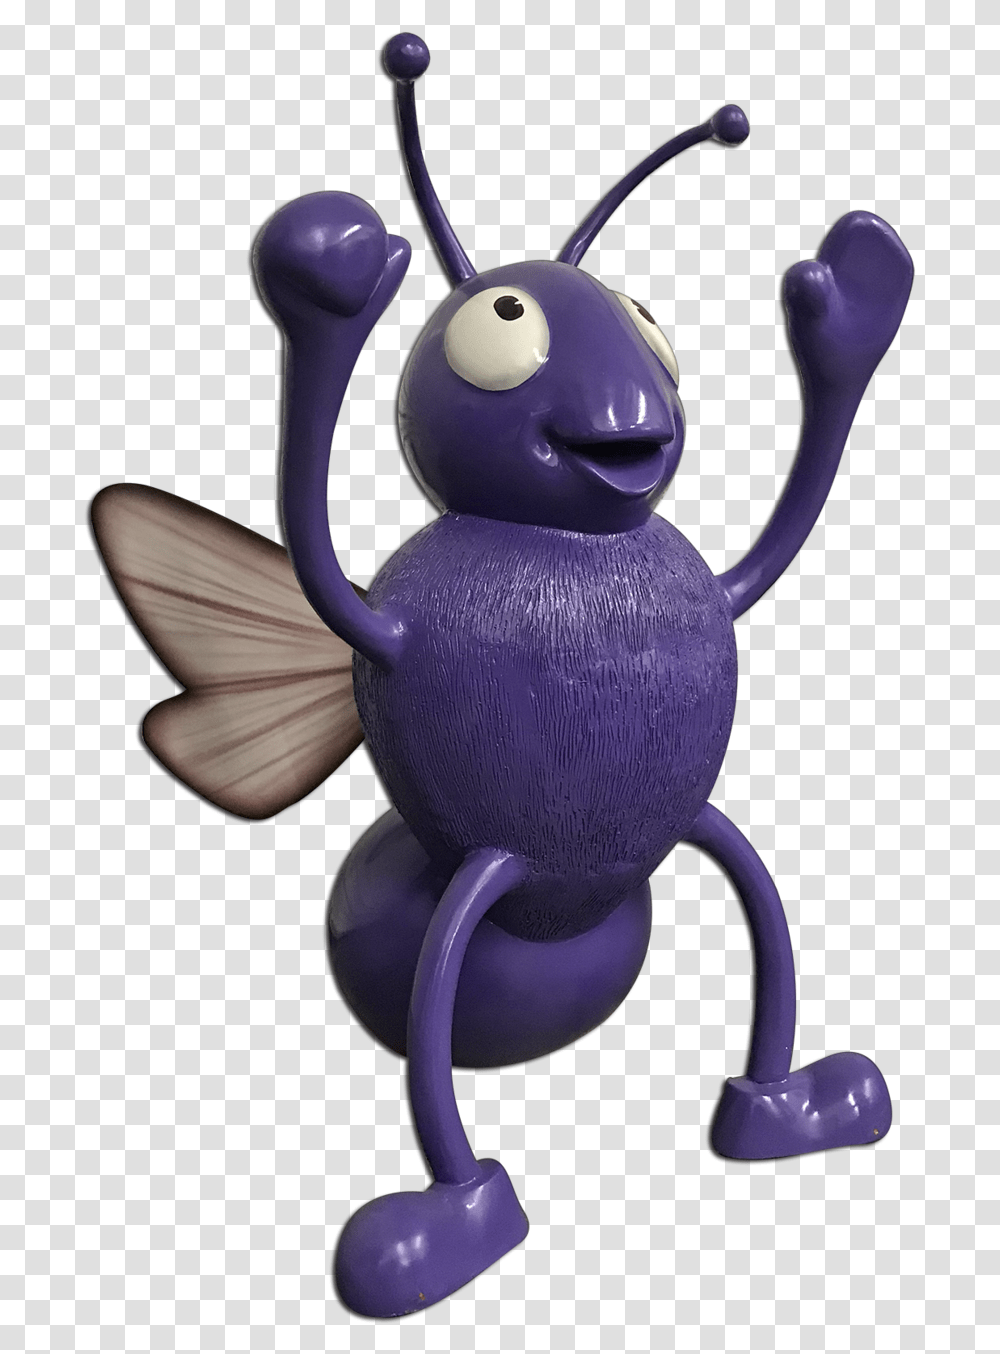 Purple Flying Bug Figurine, Toy, Animal, Pottery, Sea Life Transparent Png